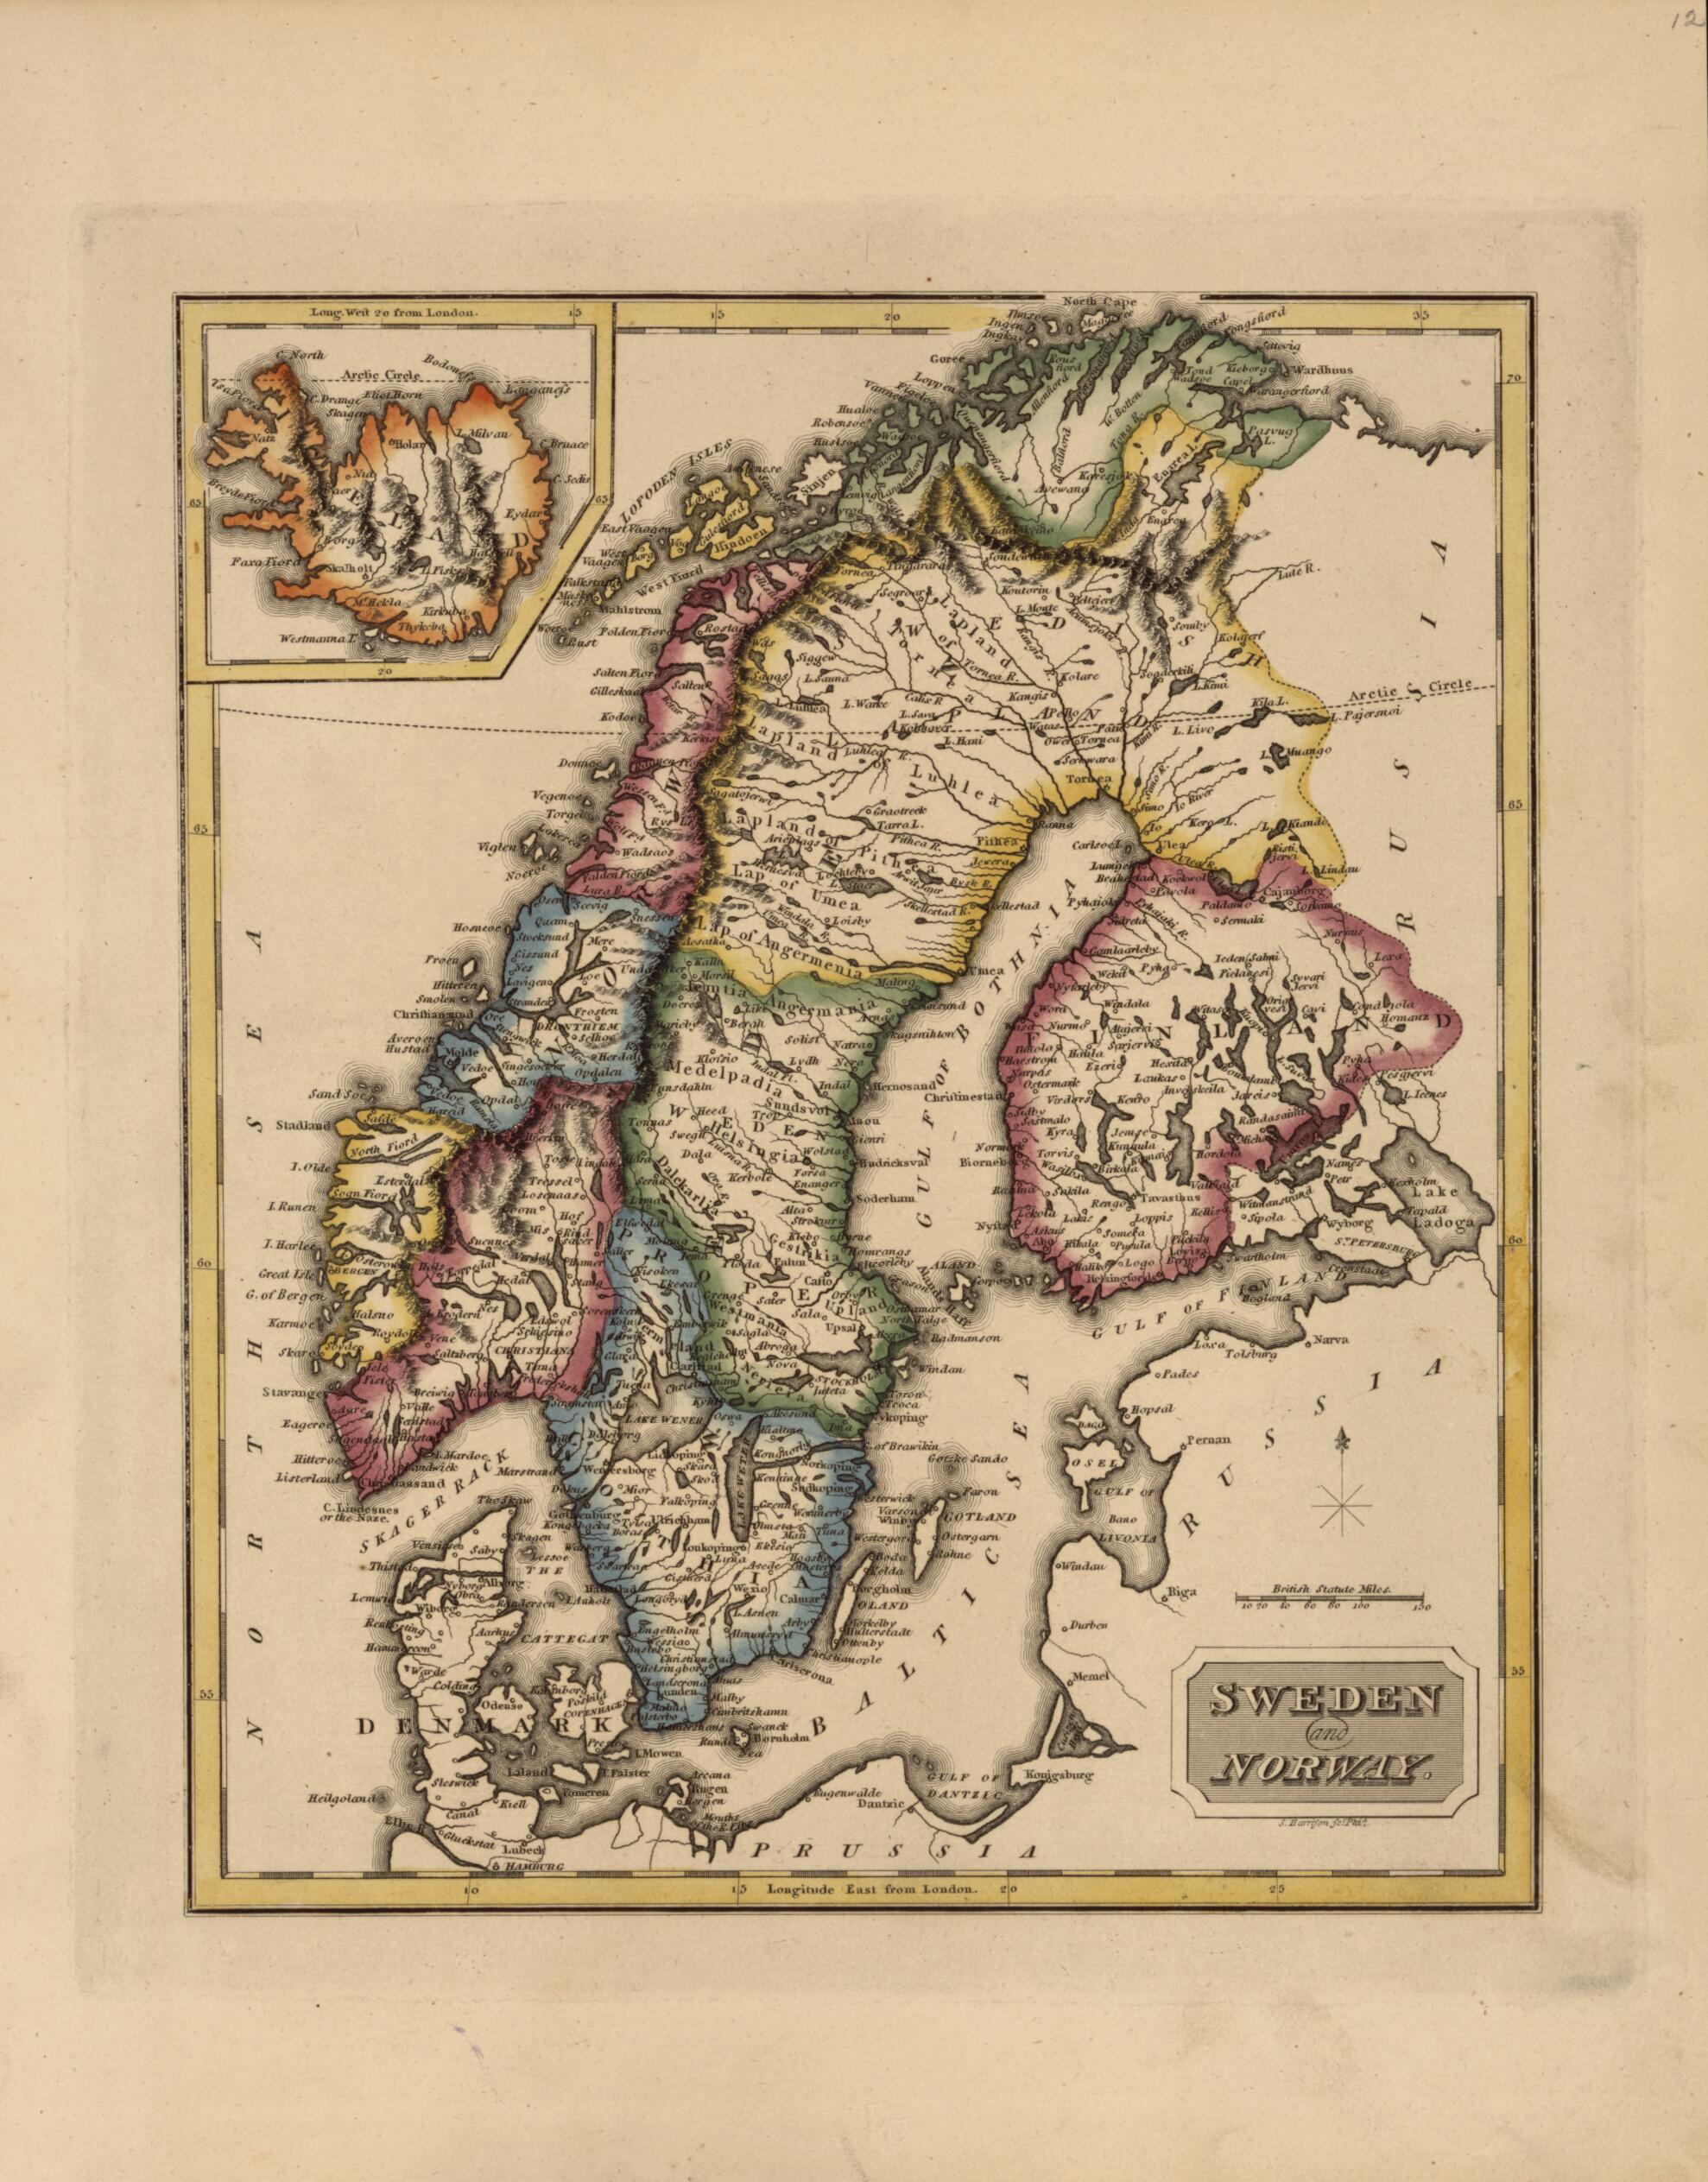 This old map of Sweden and Norway from a New and Elegant General Atlas, Containing Maps of Each of the United States. from 1817 was created by Henry Schenck Tanner in 1817